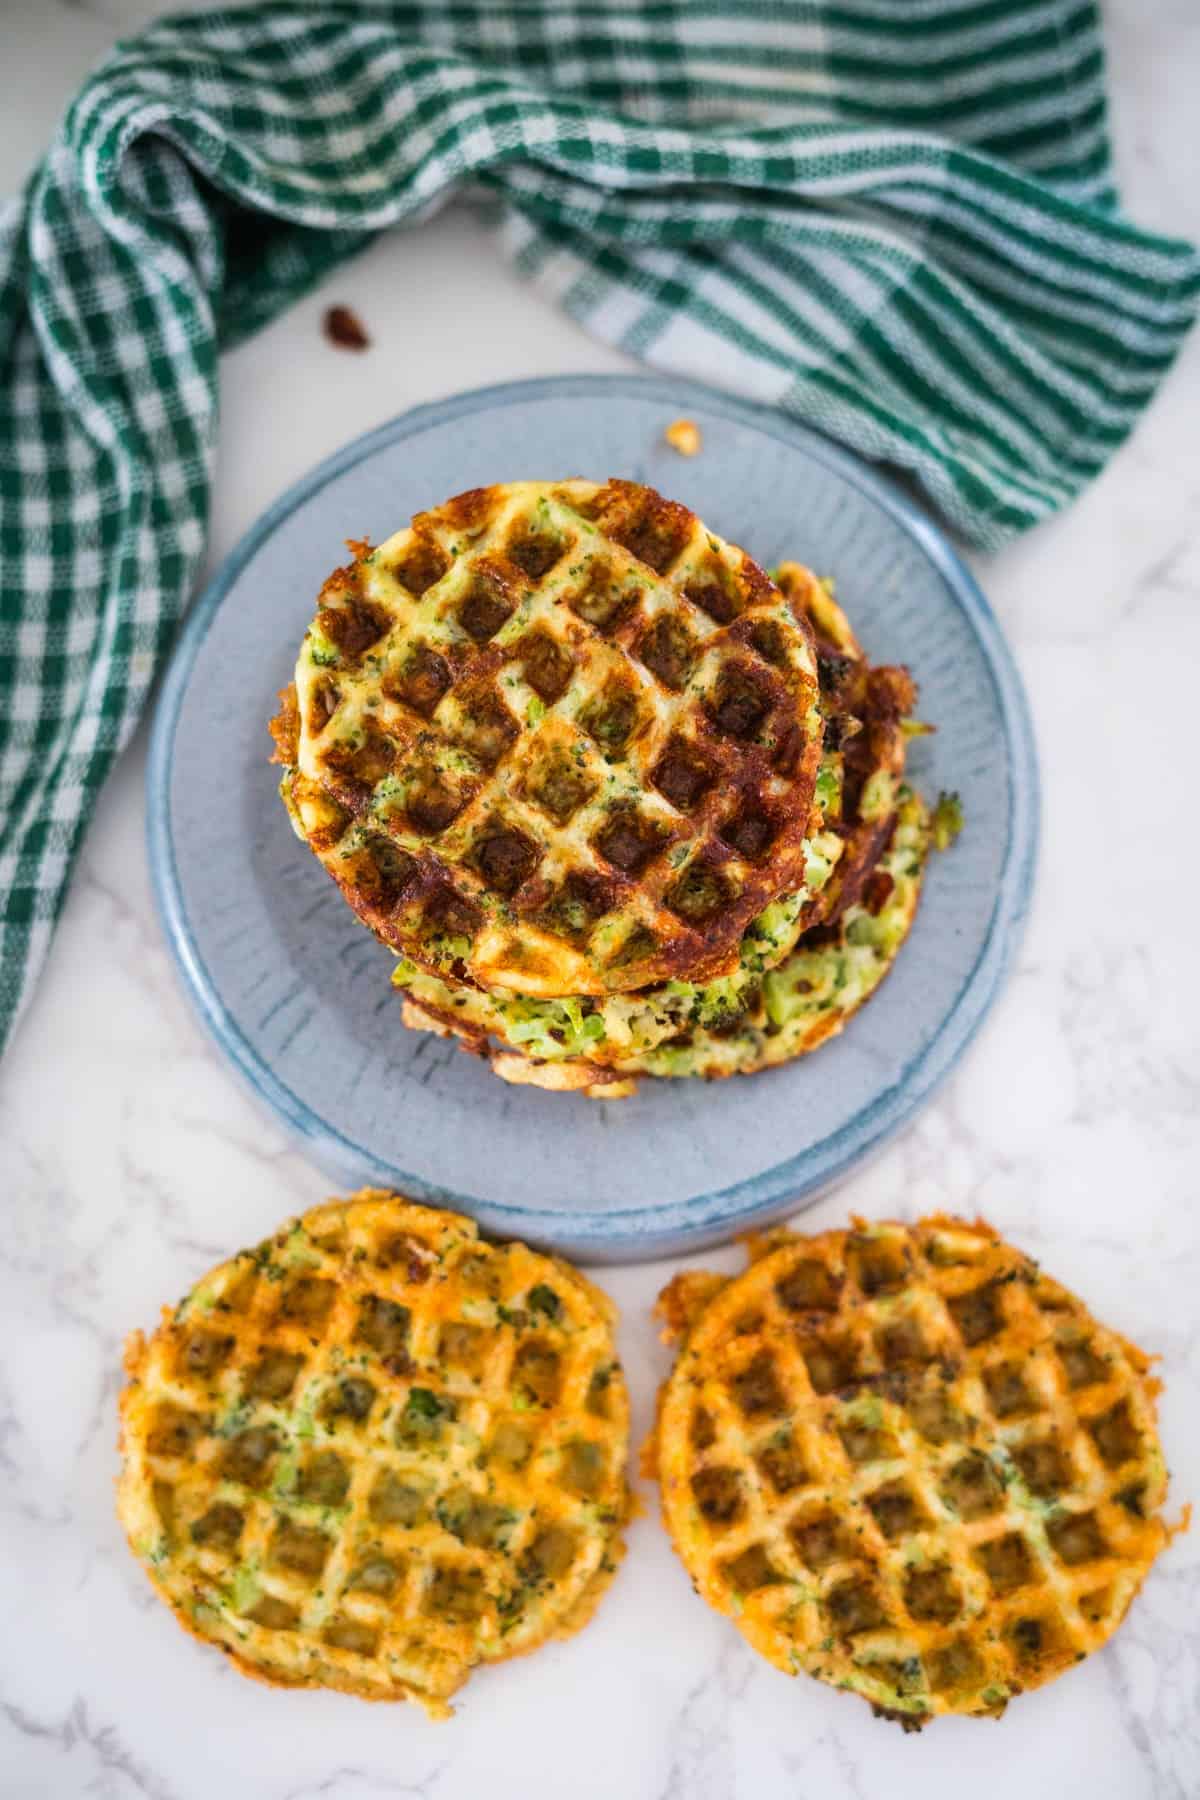 A stack of three savory broccoli cheddar waffles on a blue plate with a green striped napkin on the side.